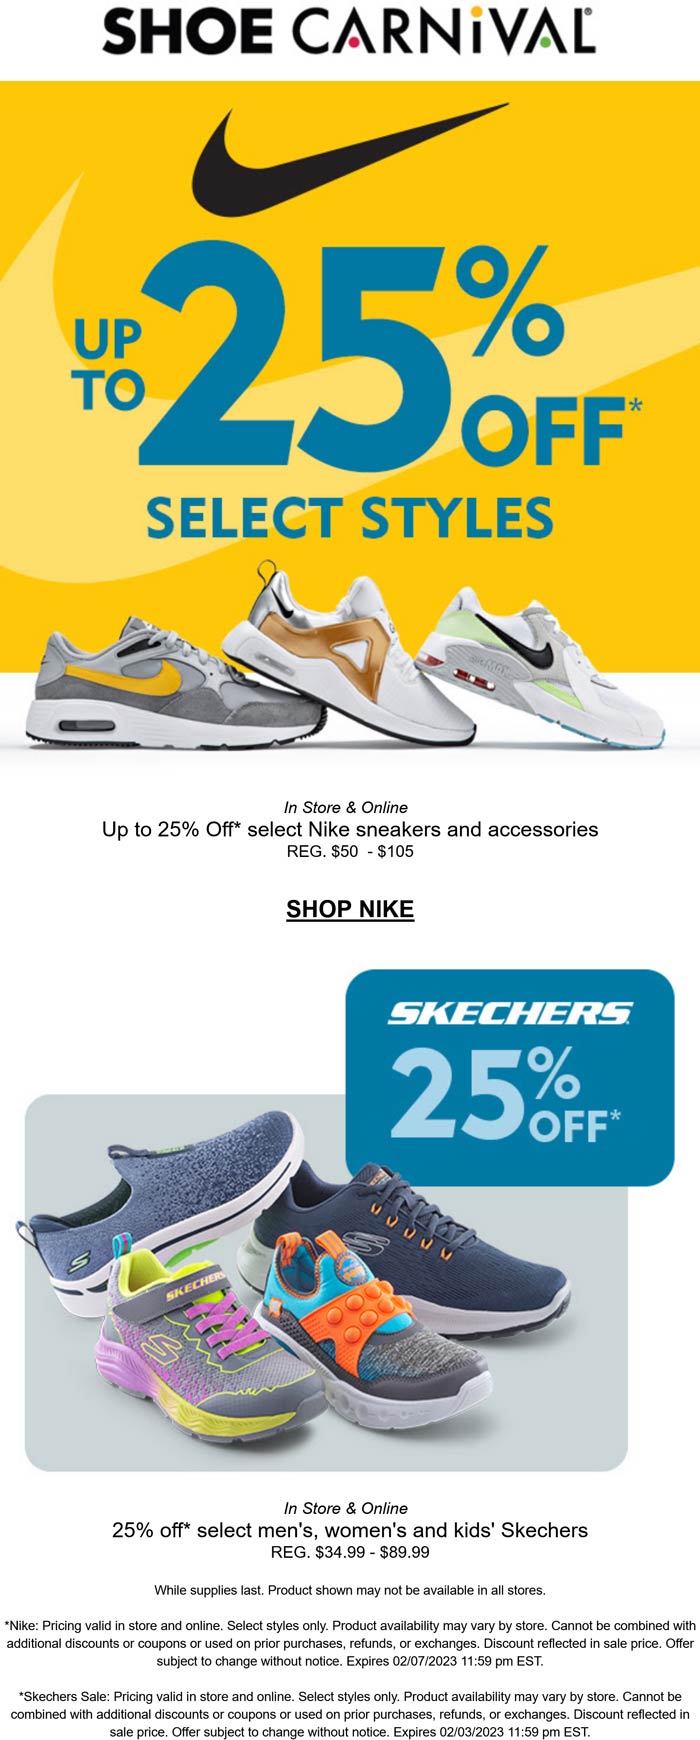 Shoe Carnival stores Coupon  25% off various Skechers & Nike at Shoe Carnival, ditto online #shoecarnival 